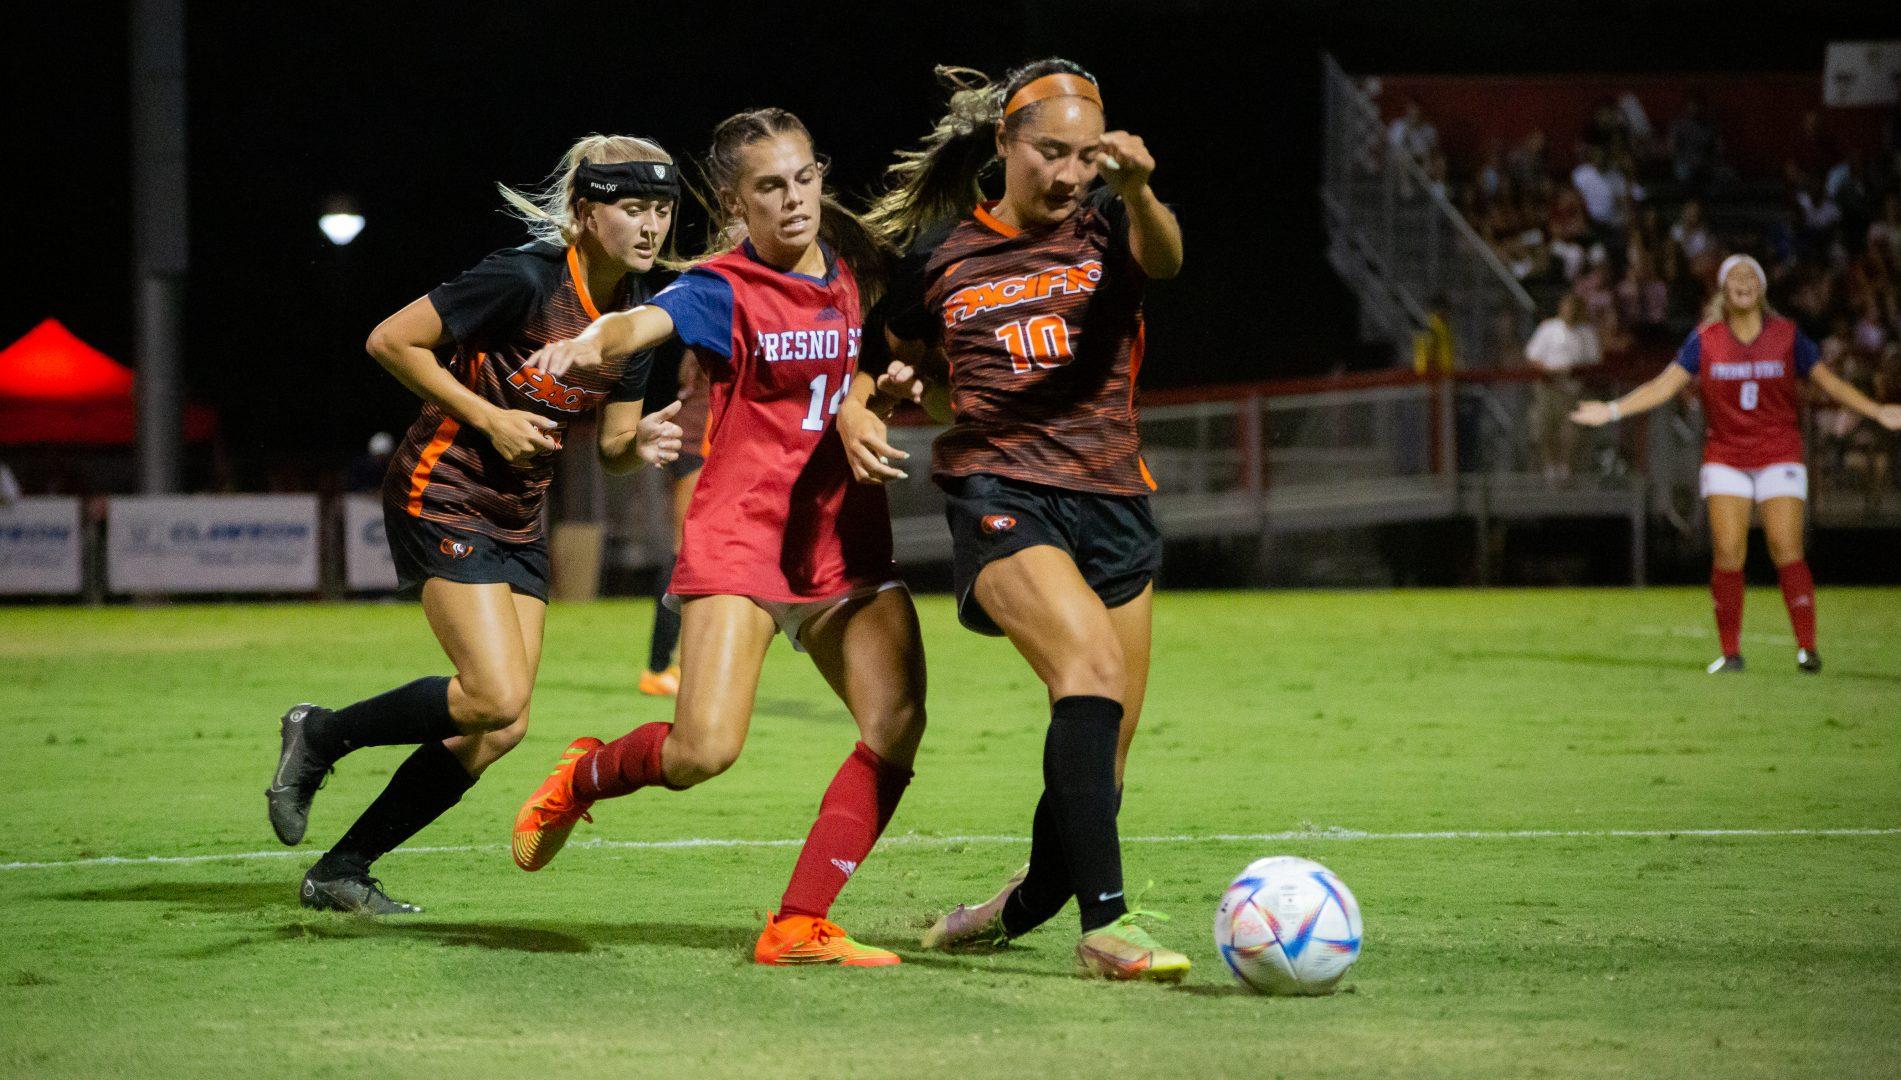 Megan Galvan races to take the ball in the game against the University of the Pacific on Sept. 4, 2022, at Fresno State Soccer Stadium. (Eric Martinez/ The Collegian)